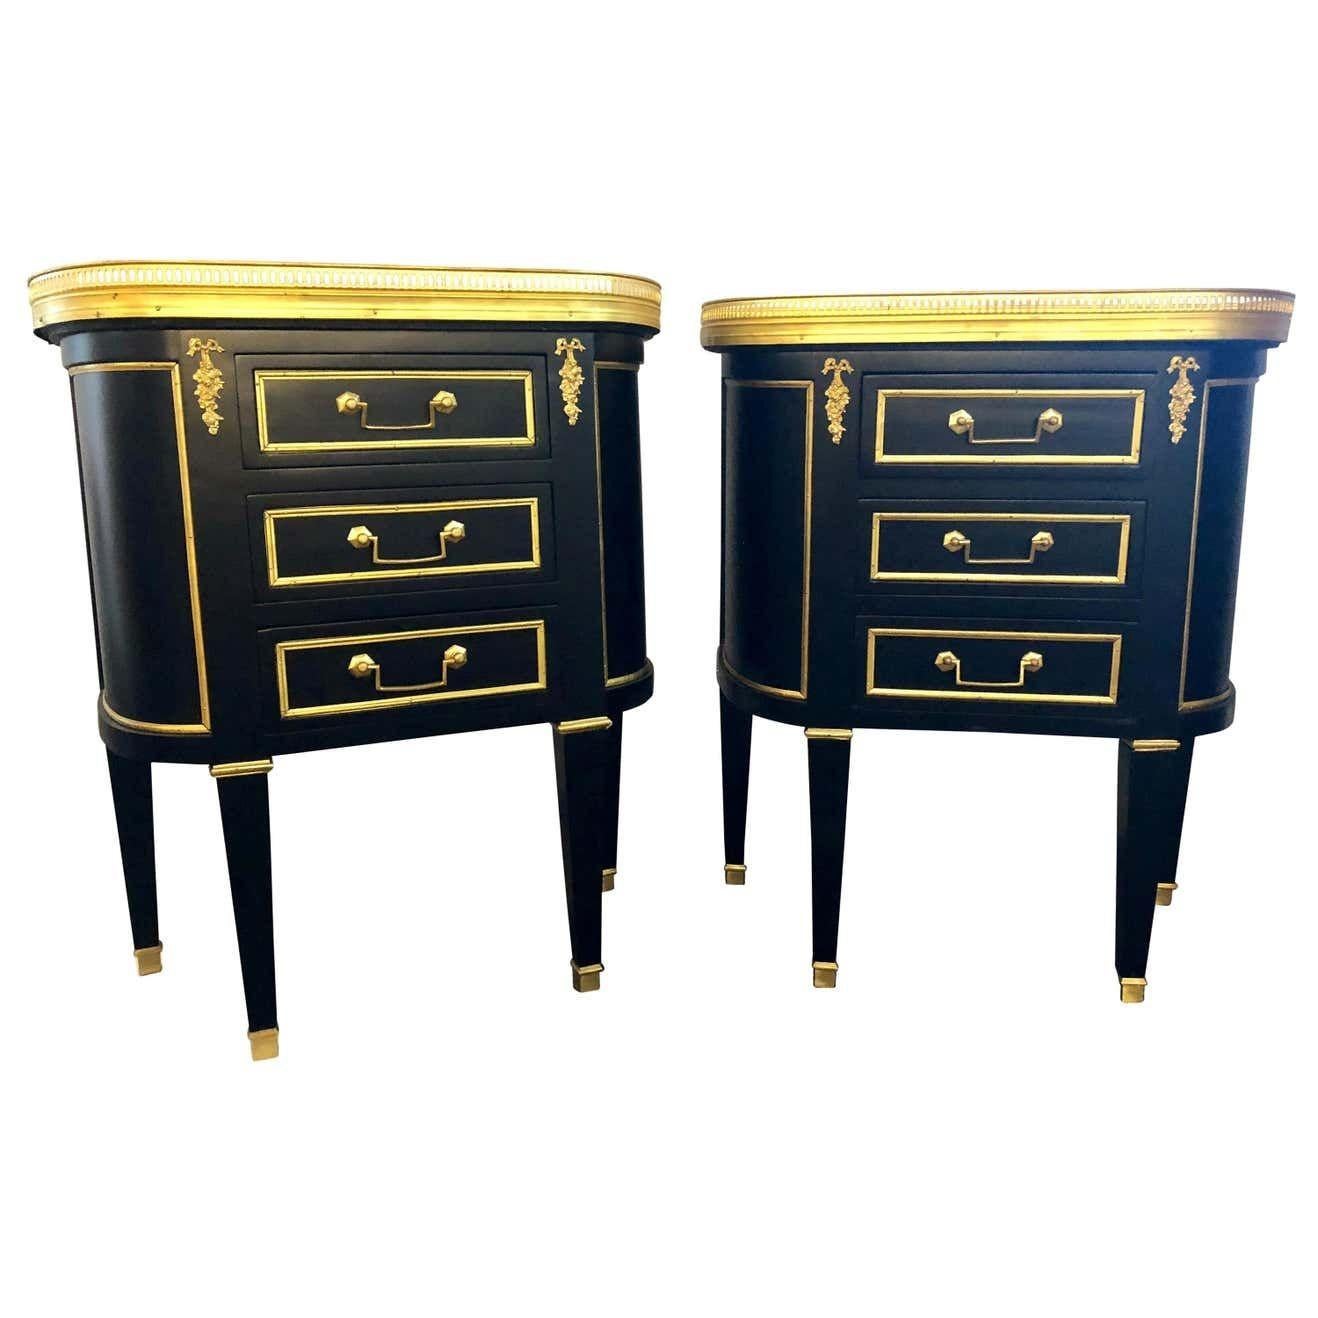 Maison Jansen inspired marble-top galleried ebonized end tables and or nightstands with three drawers.
Pair of Jansen inspired marble-top galleried ebonized end tables and or nightstands with three drawers. These Hollywood Regency end tables will